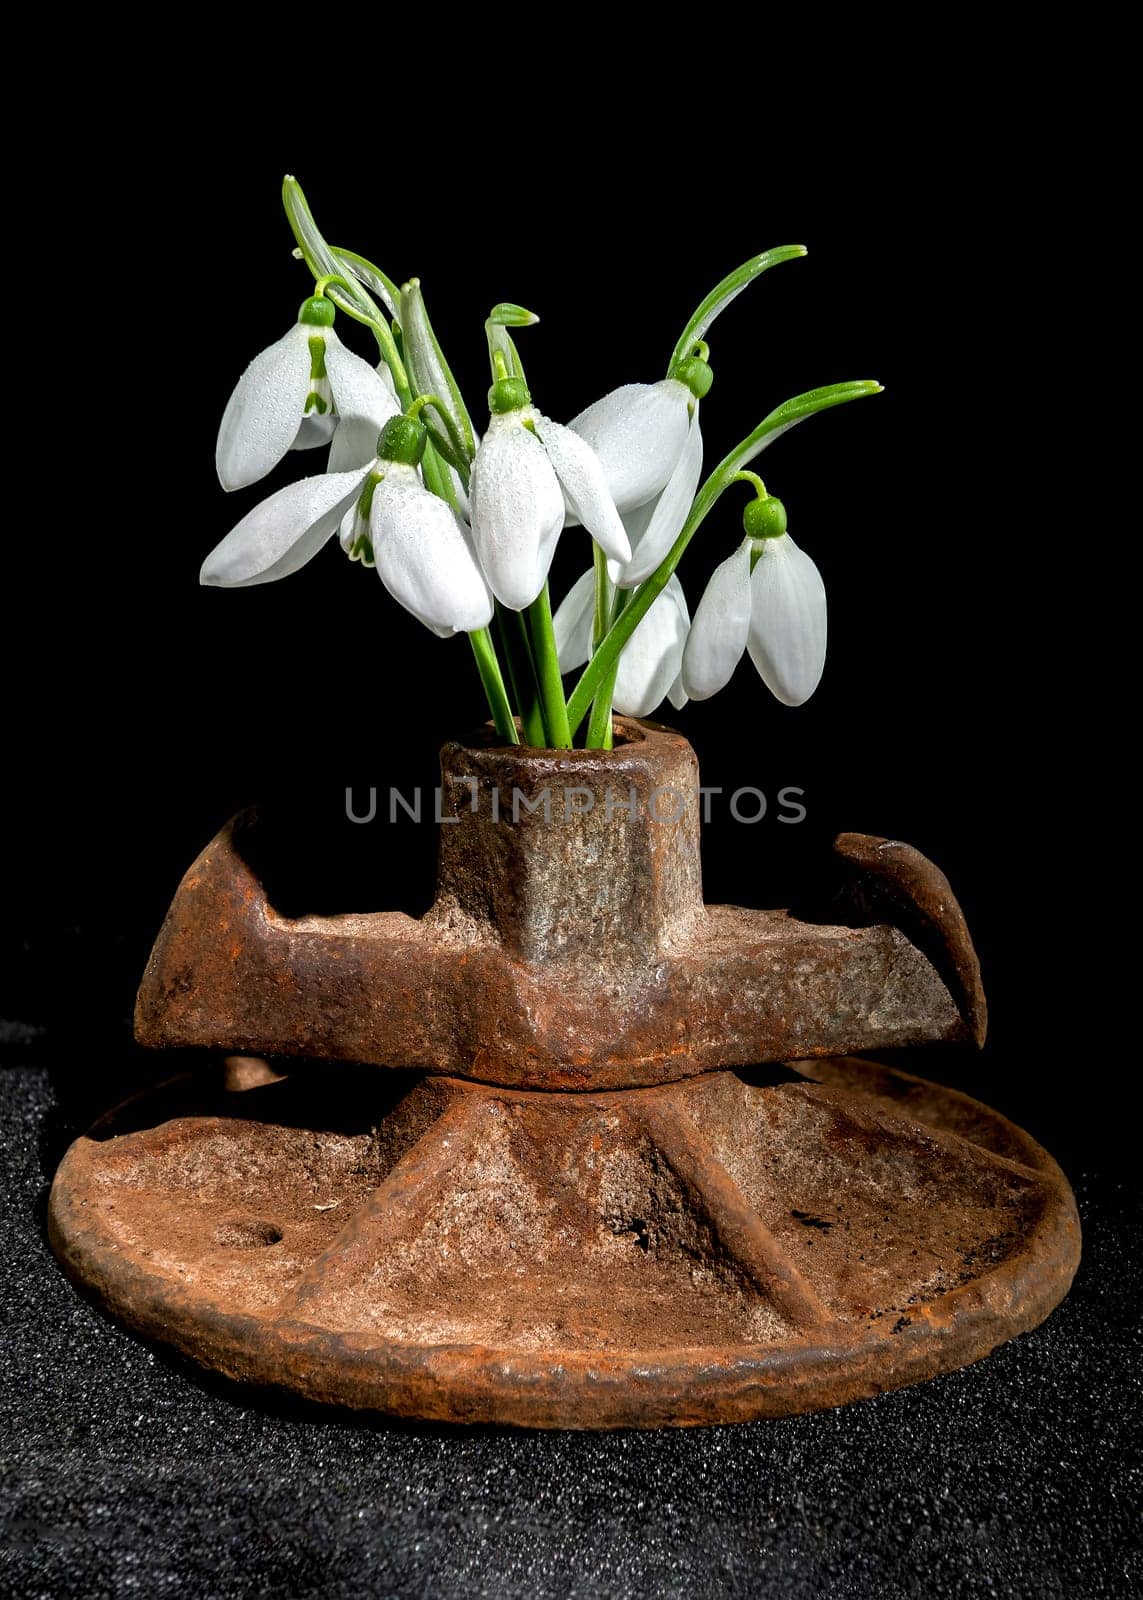 Old rusty metal tool and white snowdrops on a black background by Multipedia